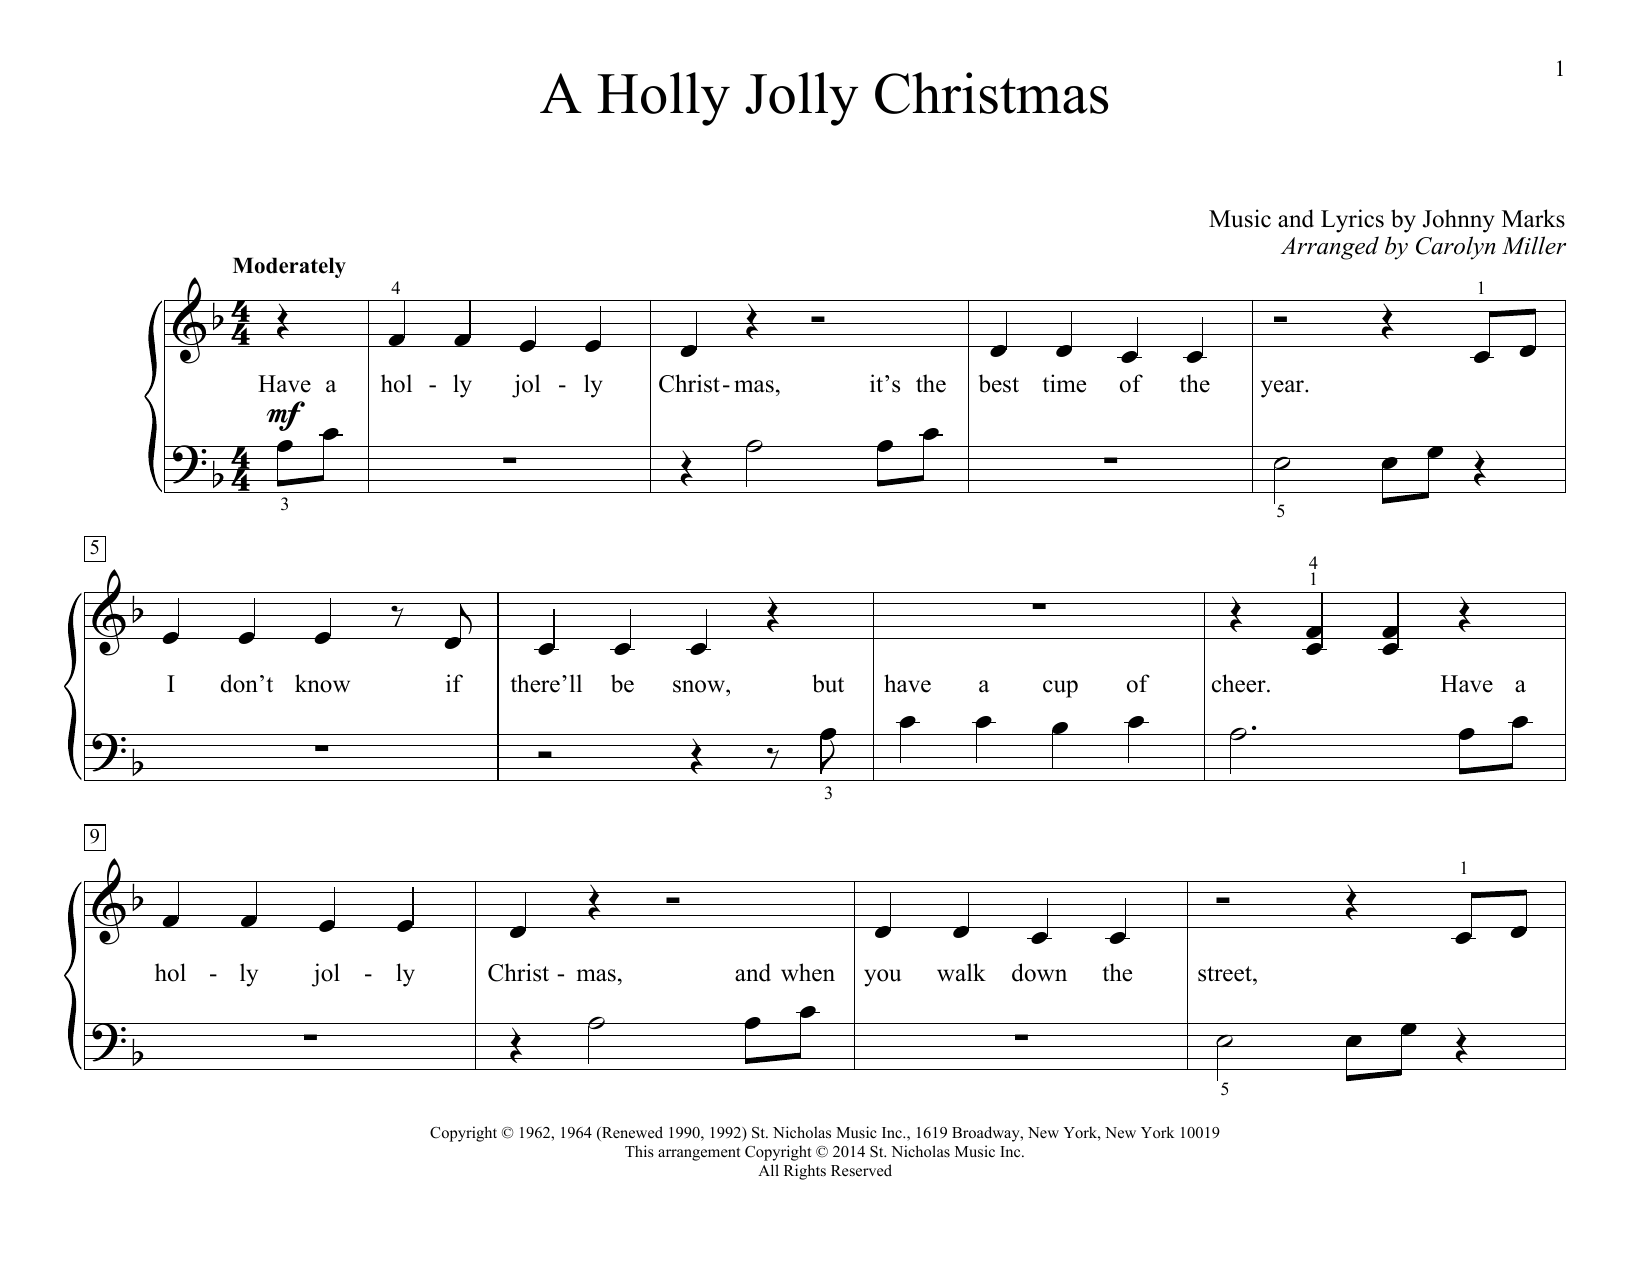 Download Carolyn Miller A Holly Jolly Christmas Sheet Music